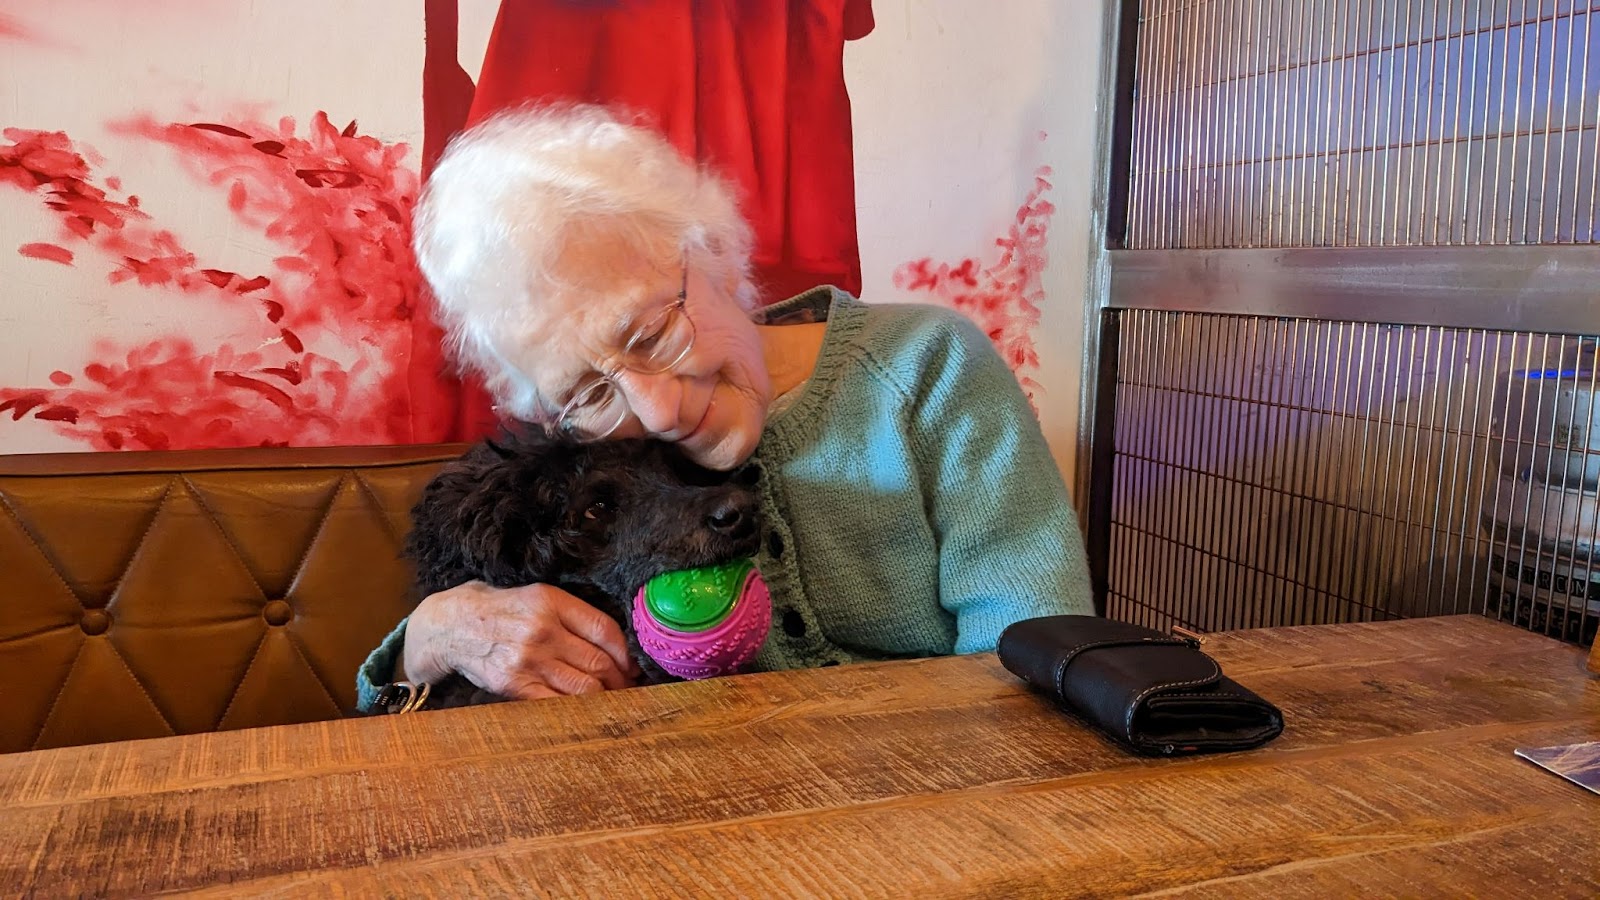 Photo of Iris having a cuddle with a black poodle named Dora